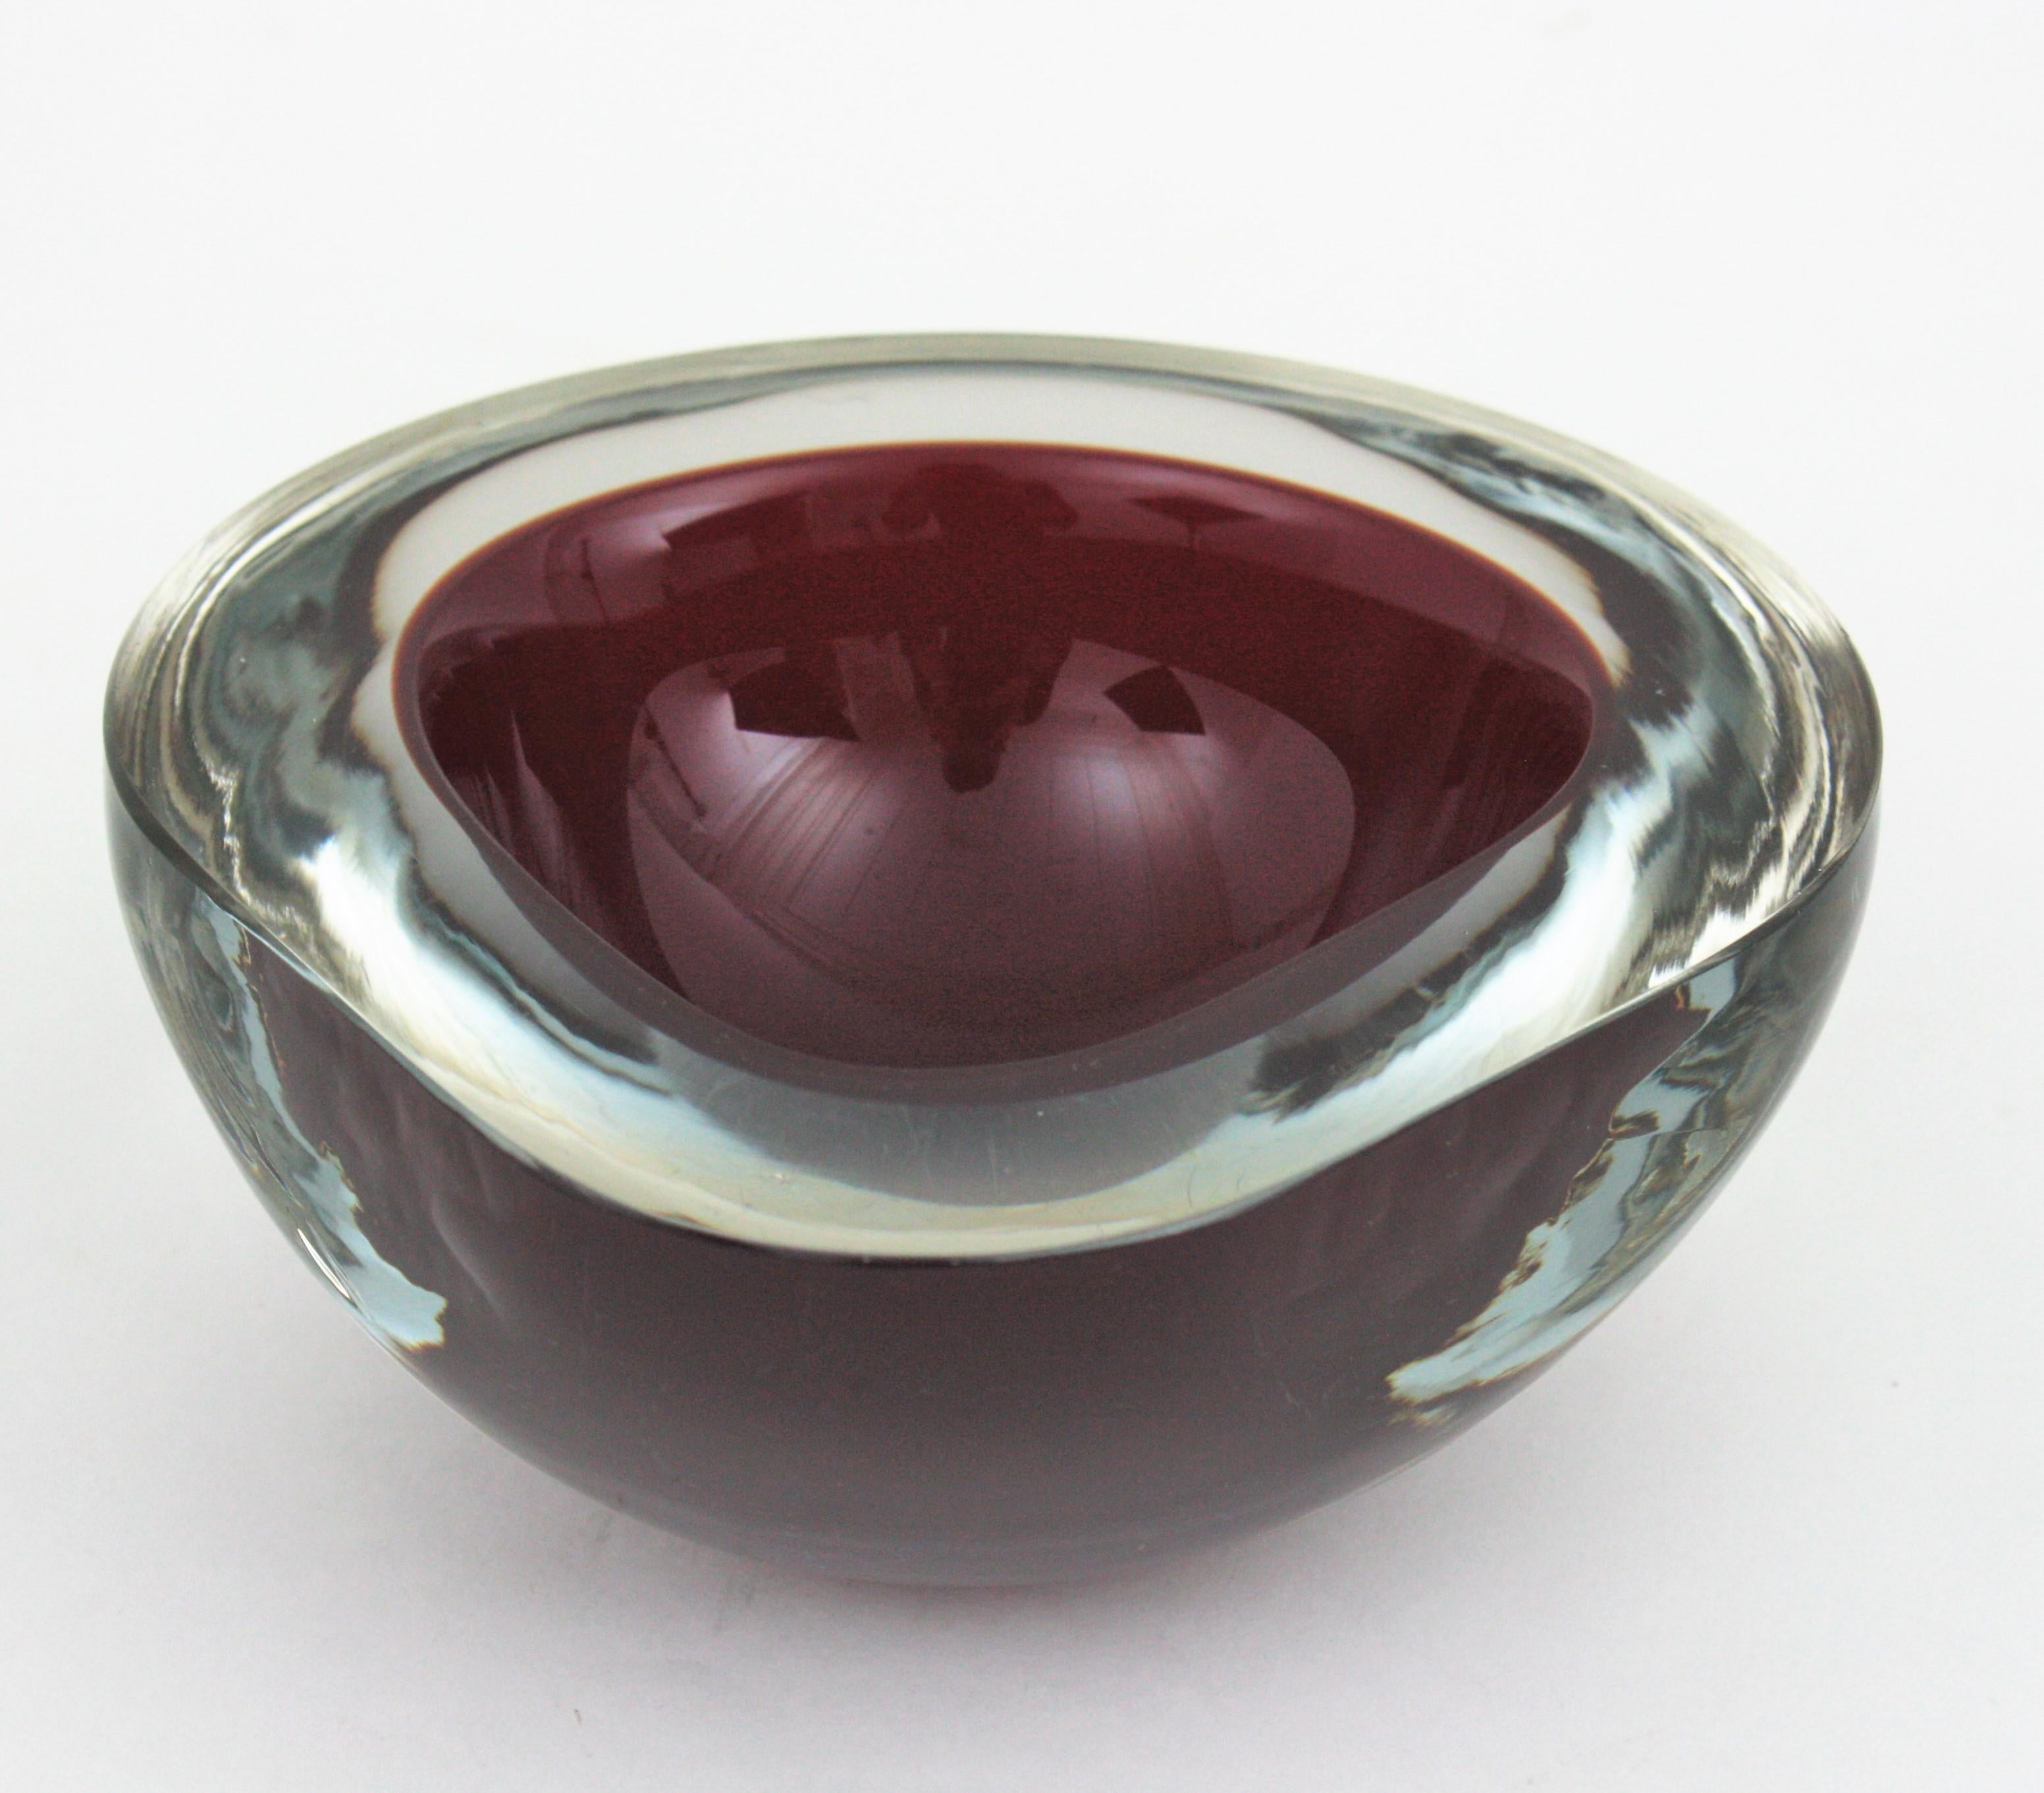 Hand blown Murano Sommerso triangle geode bowl in garnet glass. Italy, 1960s.
This geode bowl in shades of Burgundy glass summerged into clear glass using the 